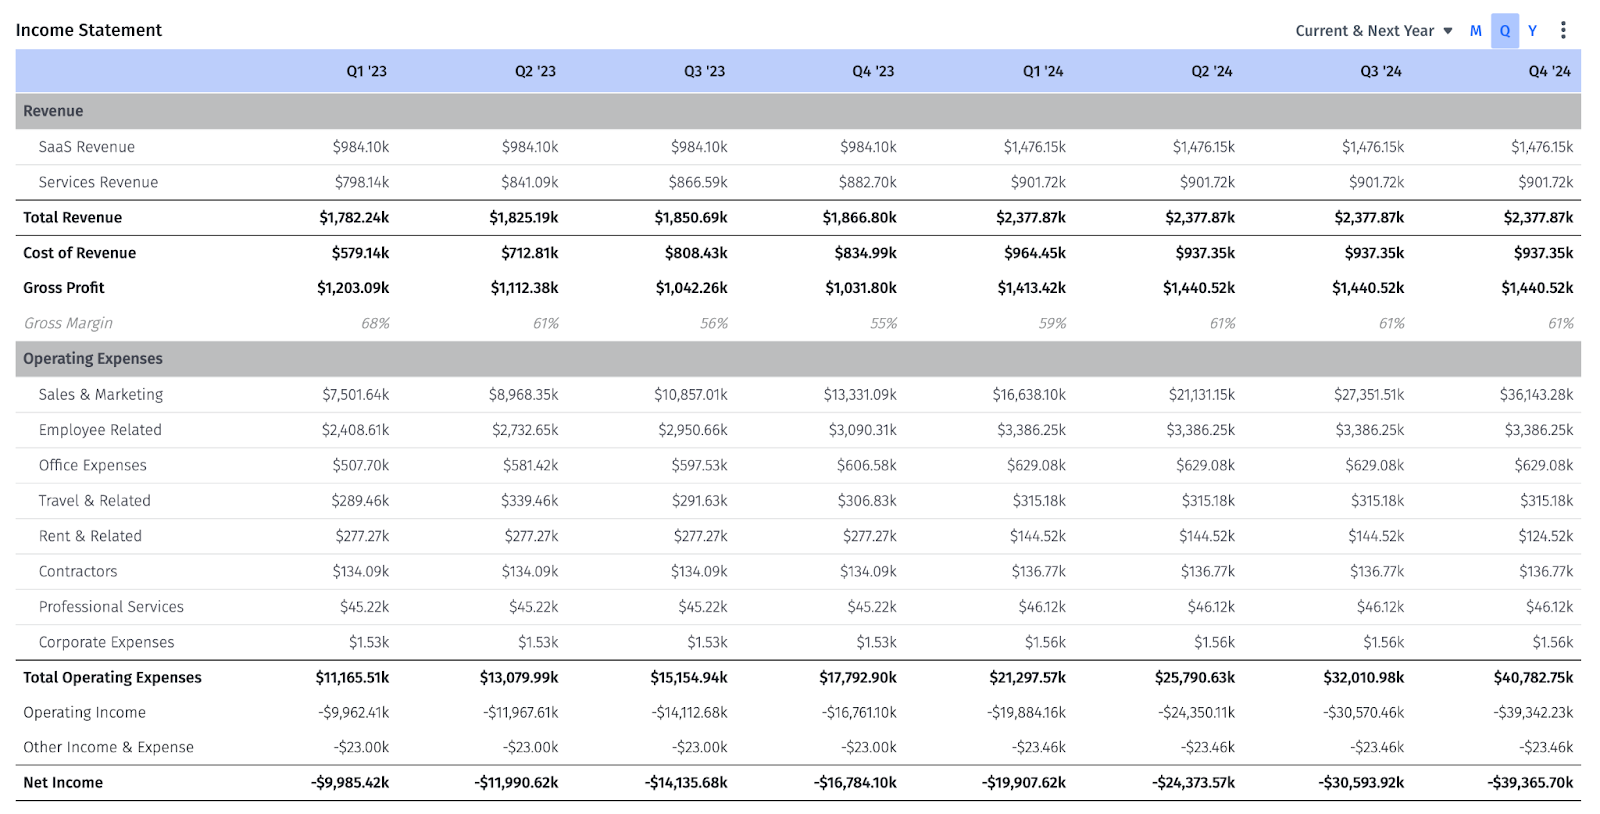 income statement forecast example with Mosaic financial statements